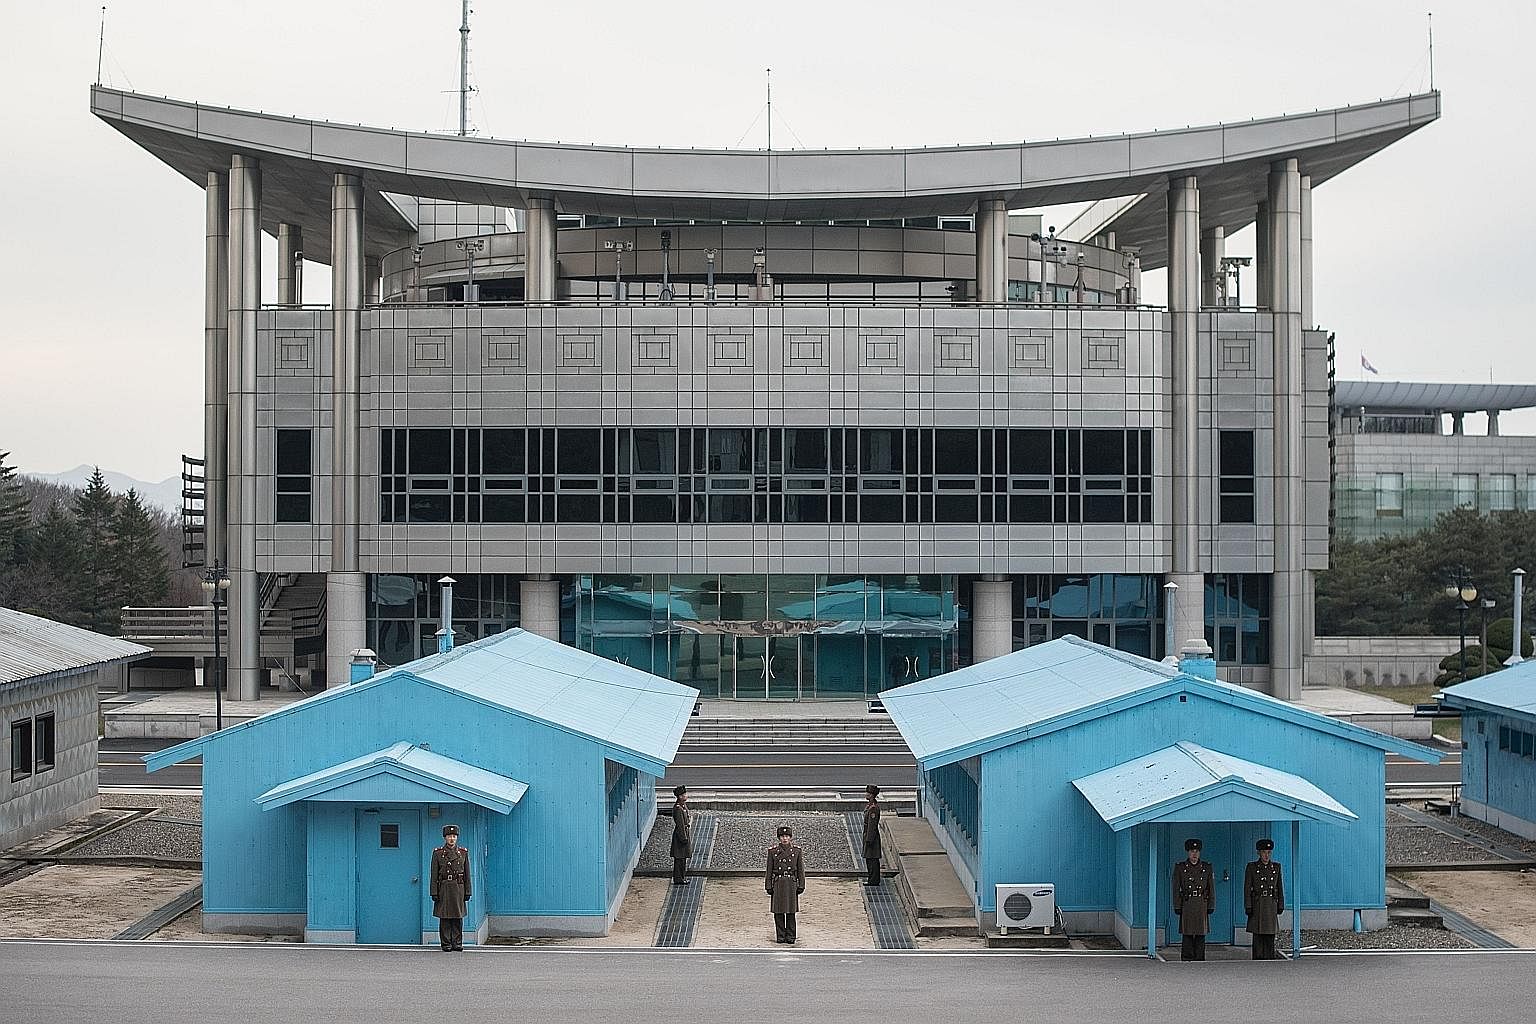 North Korean soldiers standing guard before the military demarcation line and Peace House, proposed as the venue of the upcoming talks between North and South Korea, at the border truce village of Panmunjom.